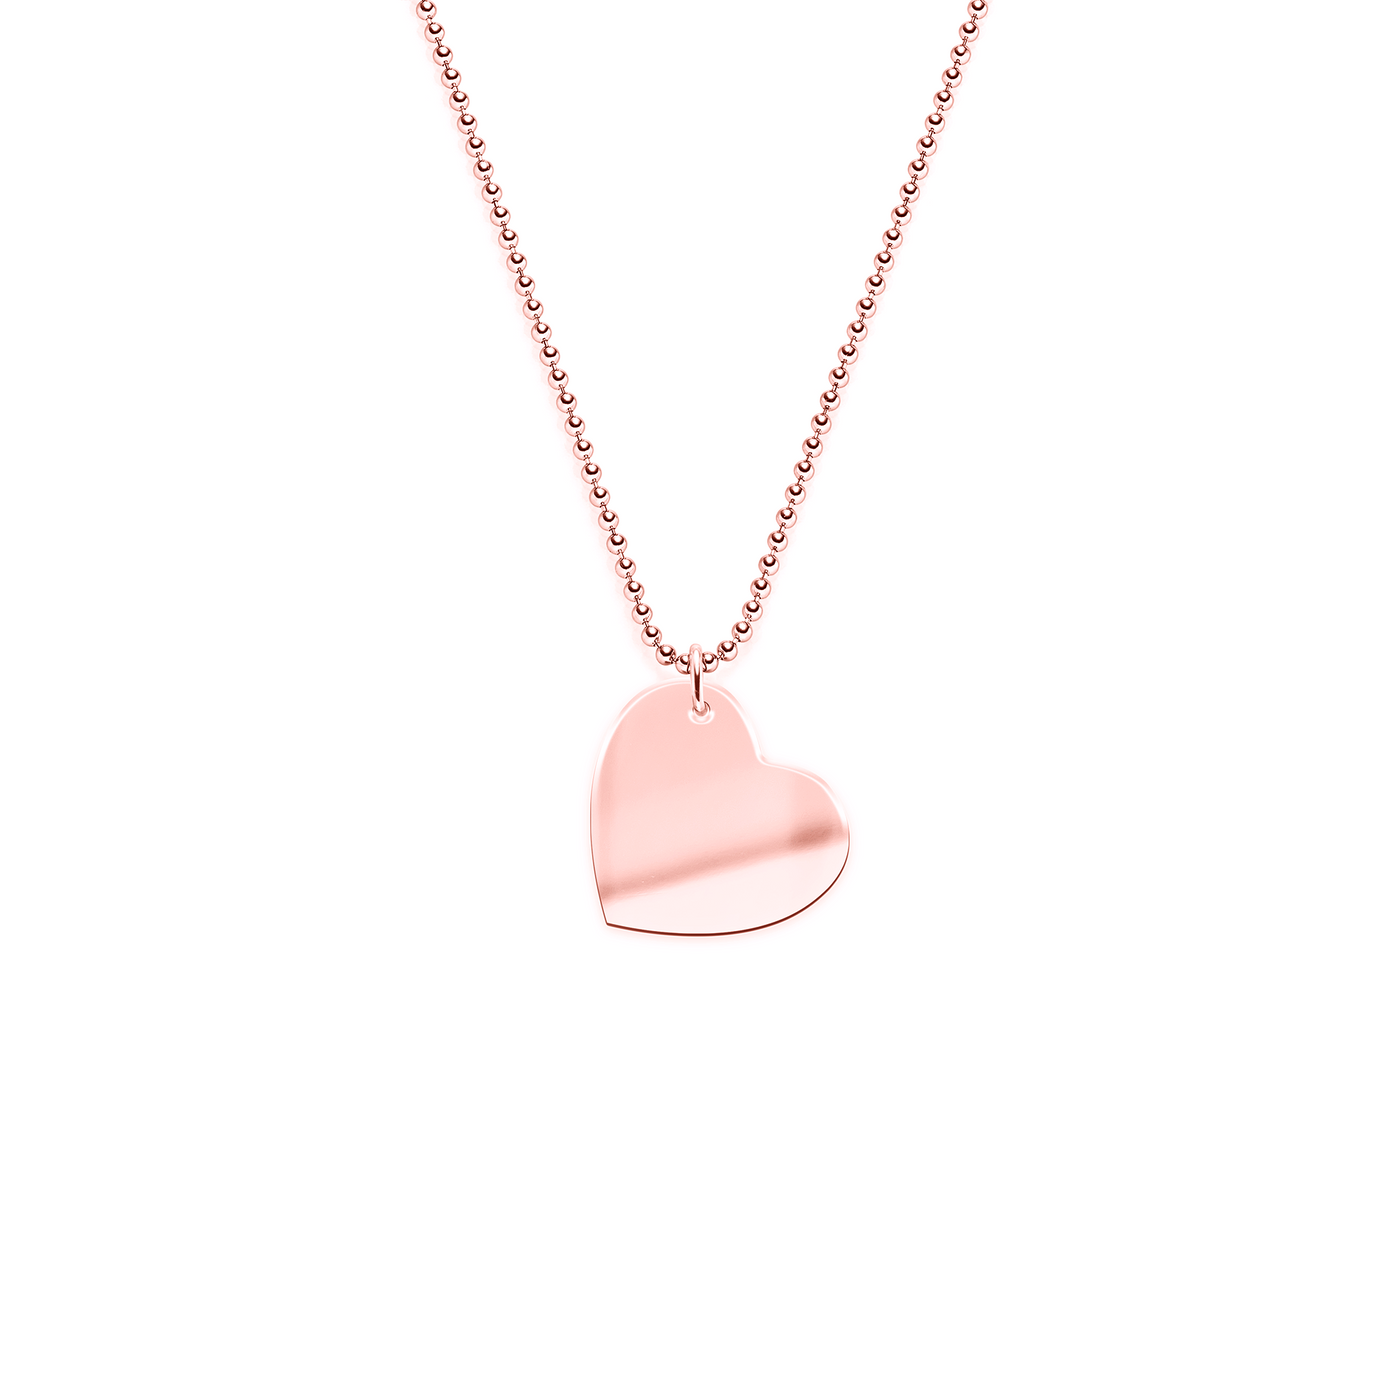 Necklace with hanging heart (Silver)